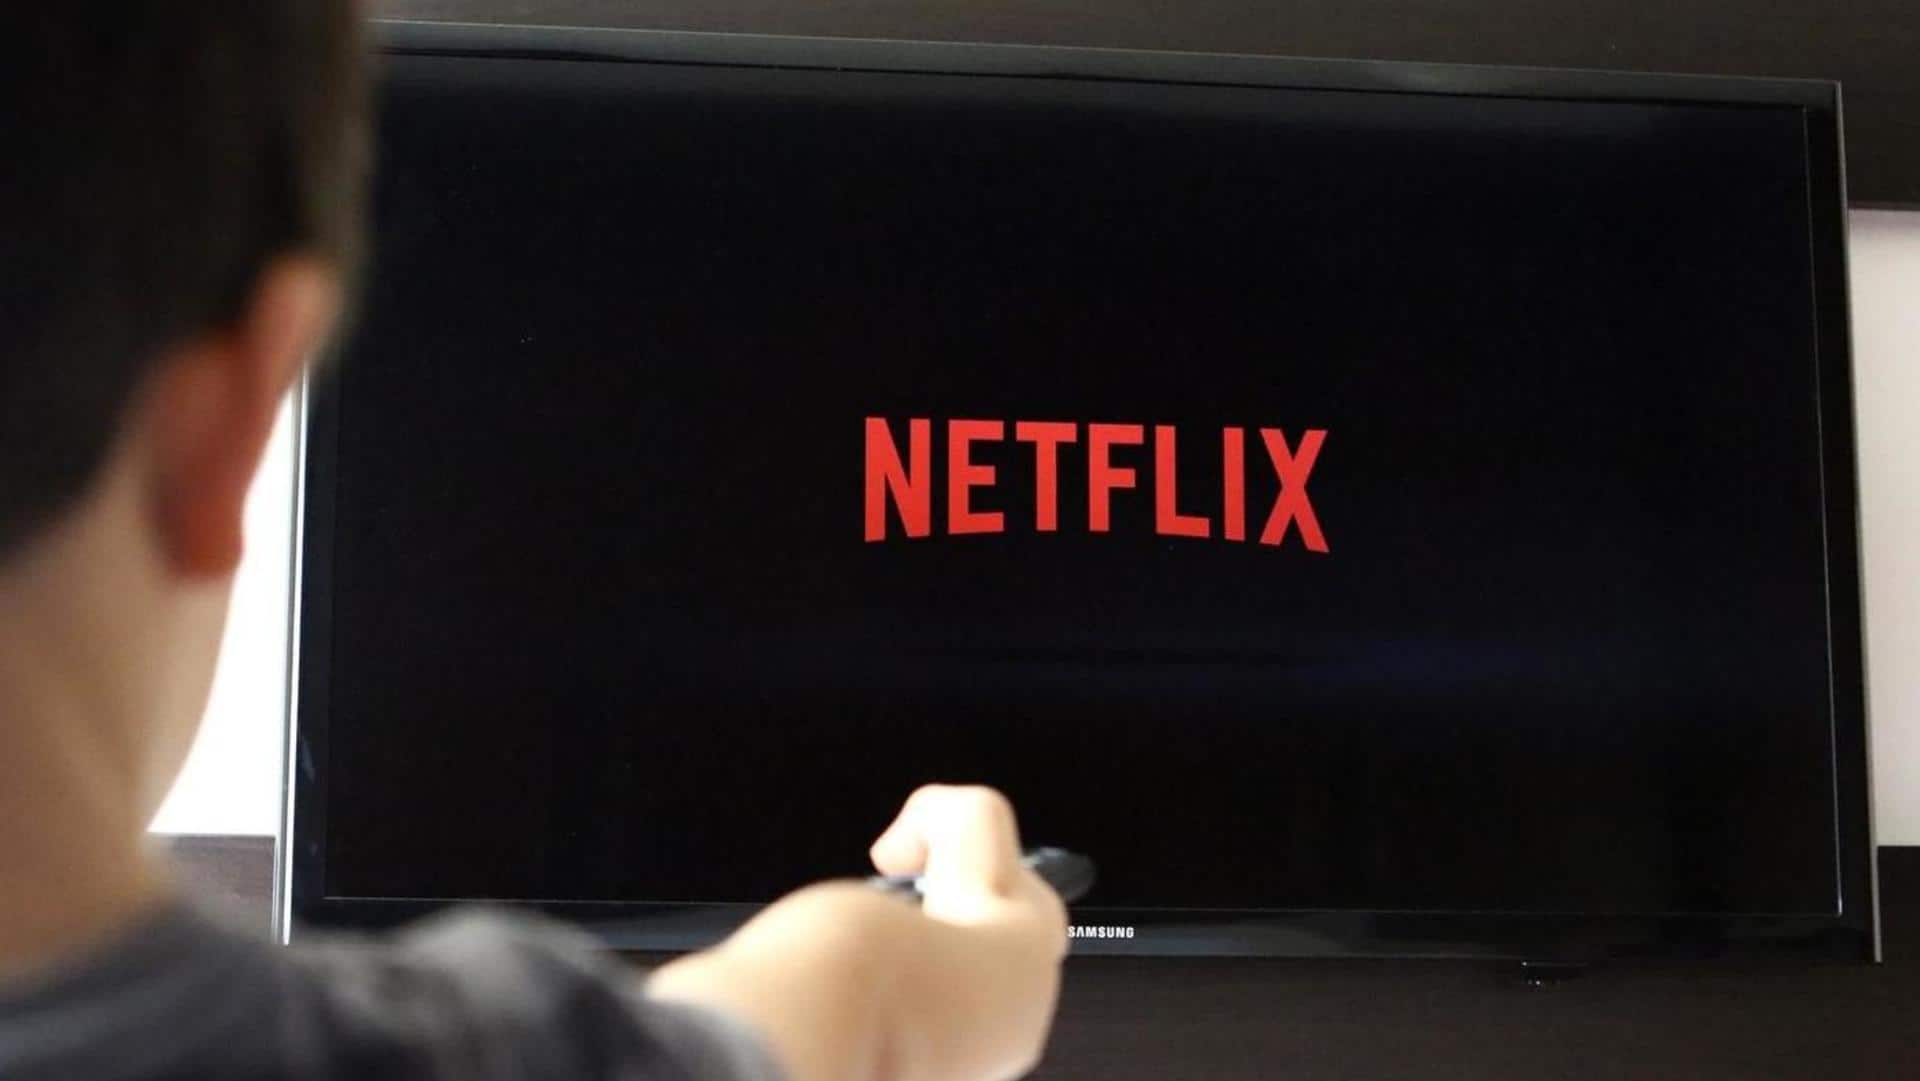 How proposed taxes on Netflix will impact you